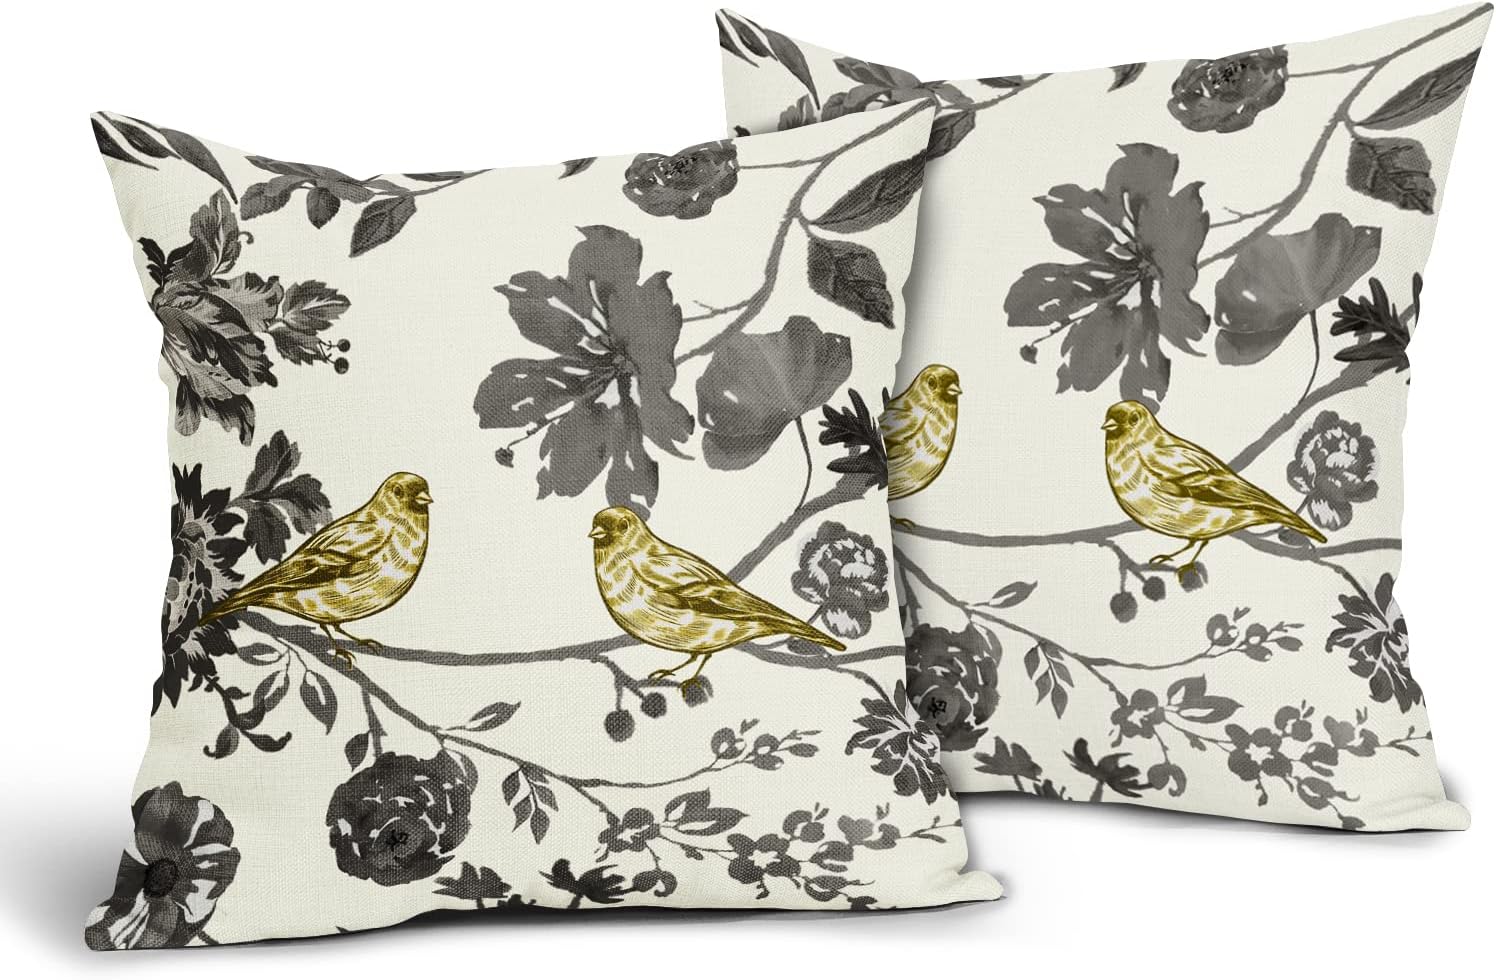 ABSOP Yellow Bird Throw Pillow Covers 18x18 Inch Set of 2 Yellow Grey Flower Pillow Covers Modern Spring Summer Floral Farmhouse Decorative Pillowcase Square Linen Cushion Case for Sofa Couch Bed